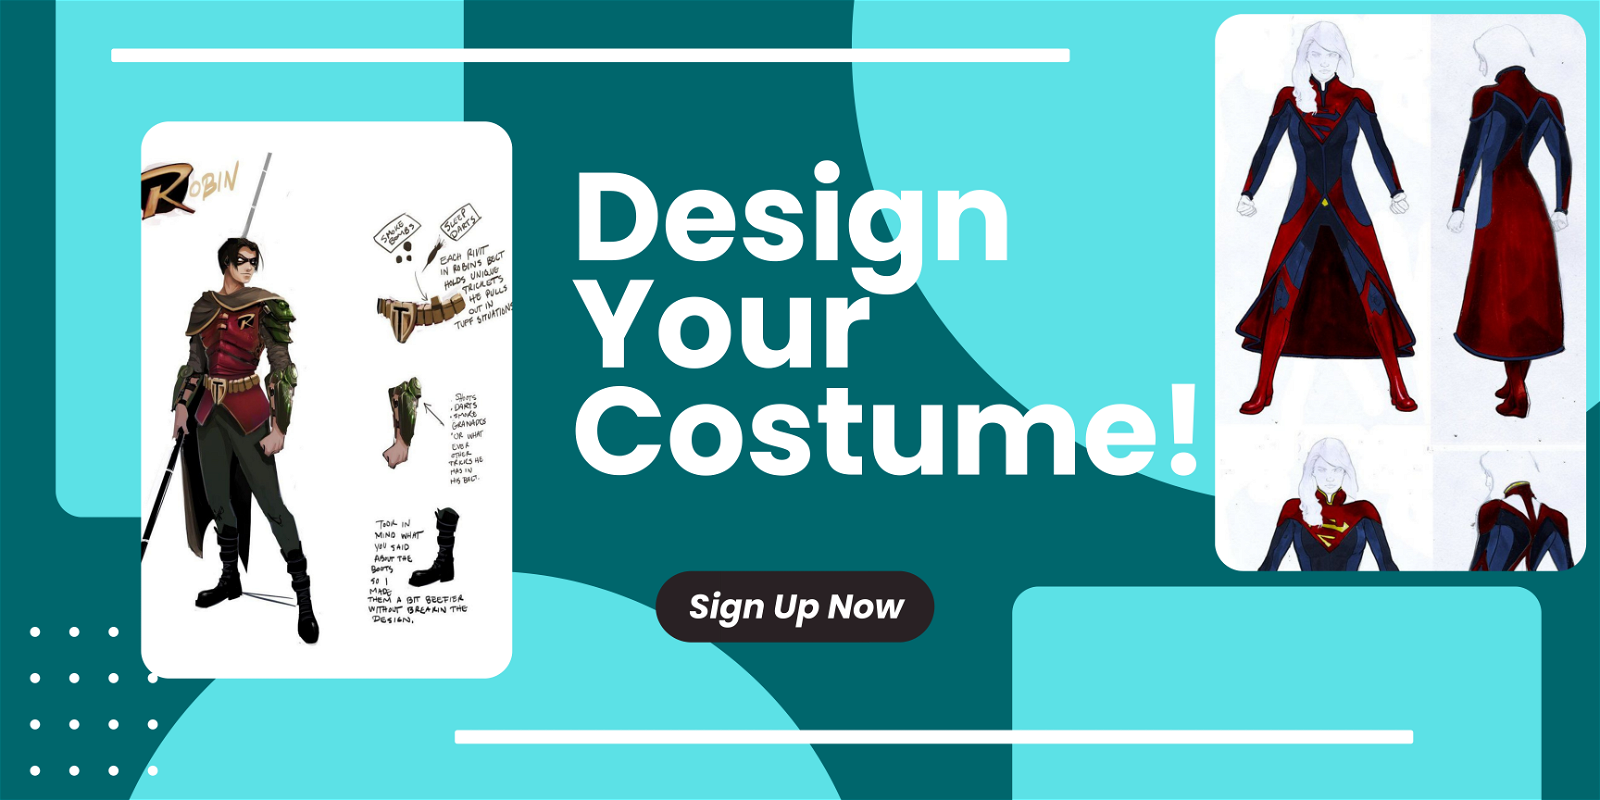 Design Your Costume Competition!